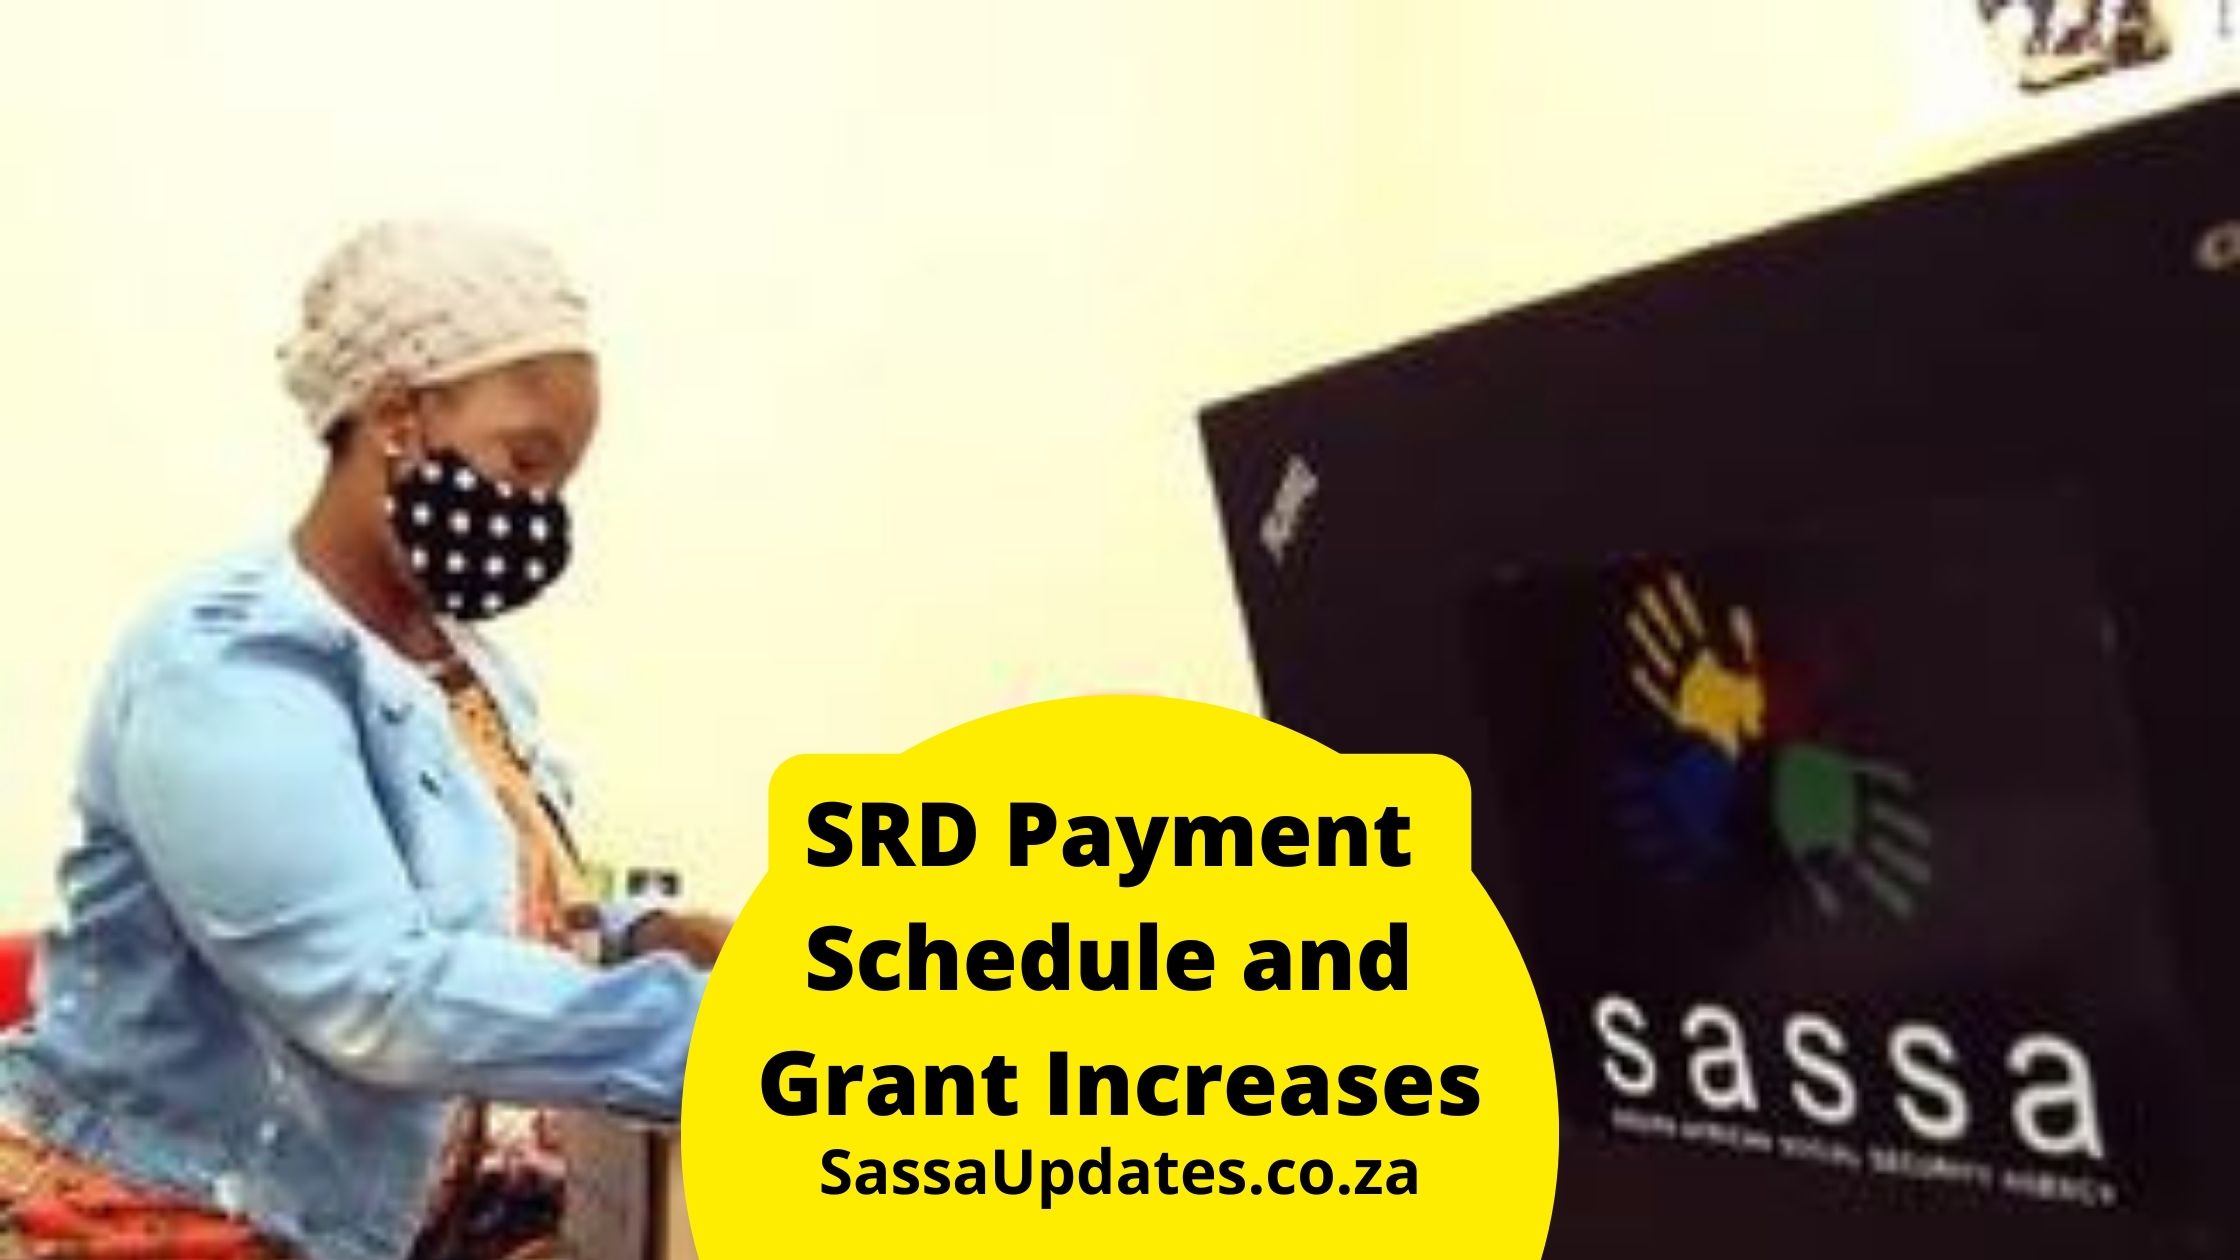 SRD Payment Schedule and Grant Increases